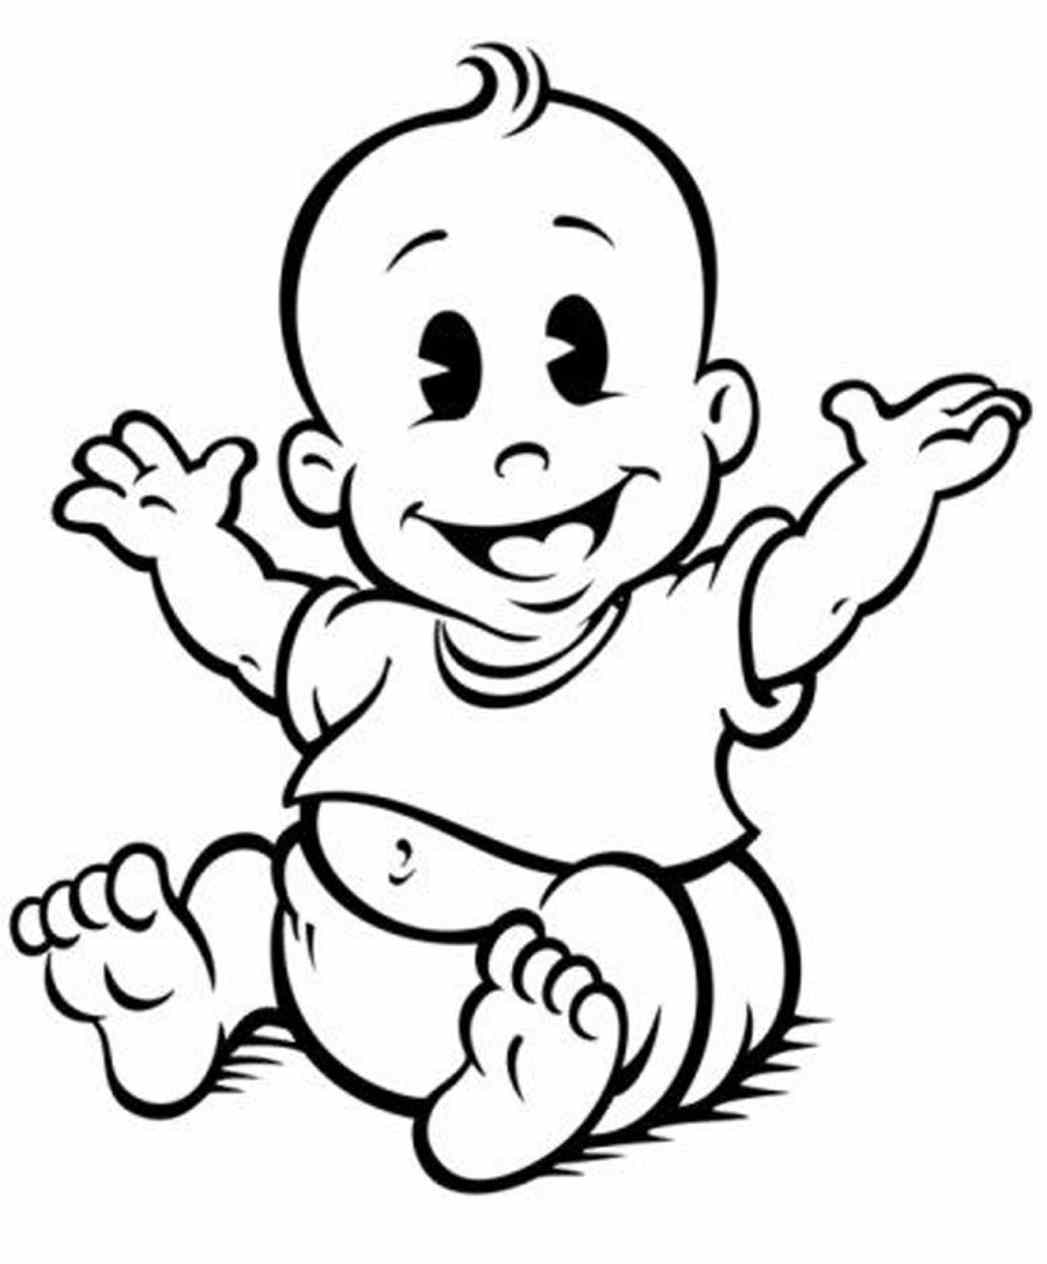 Baby boy clipart black and white clipart images gallery for